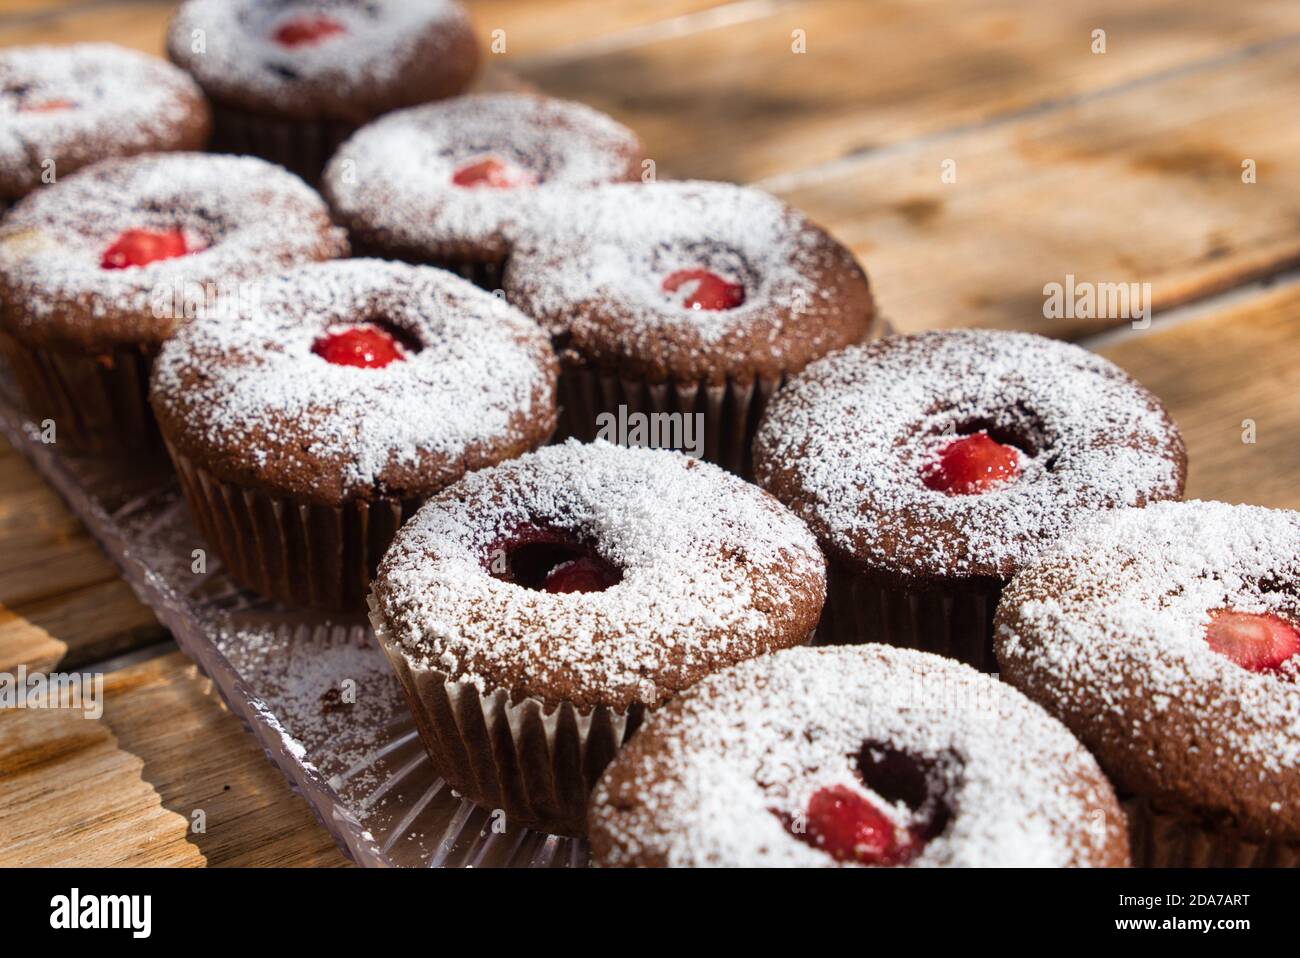 Rows of homemade cupcakes with strawberry centres. High angle view. Stock Photo